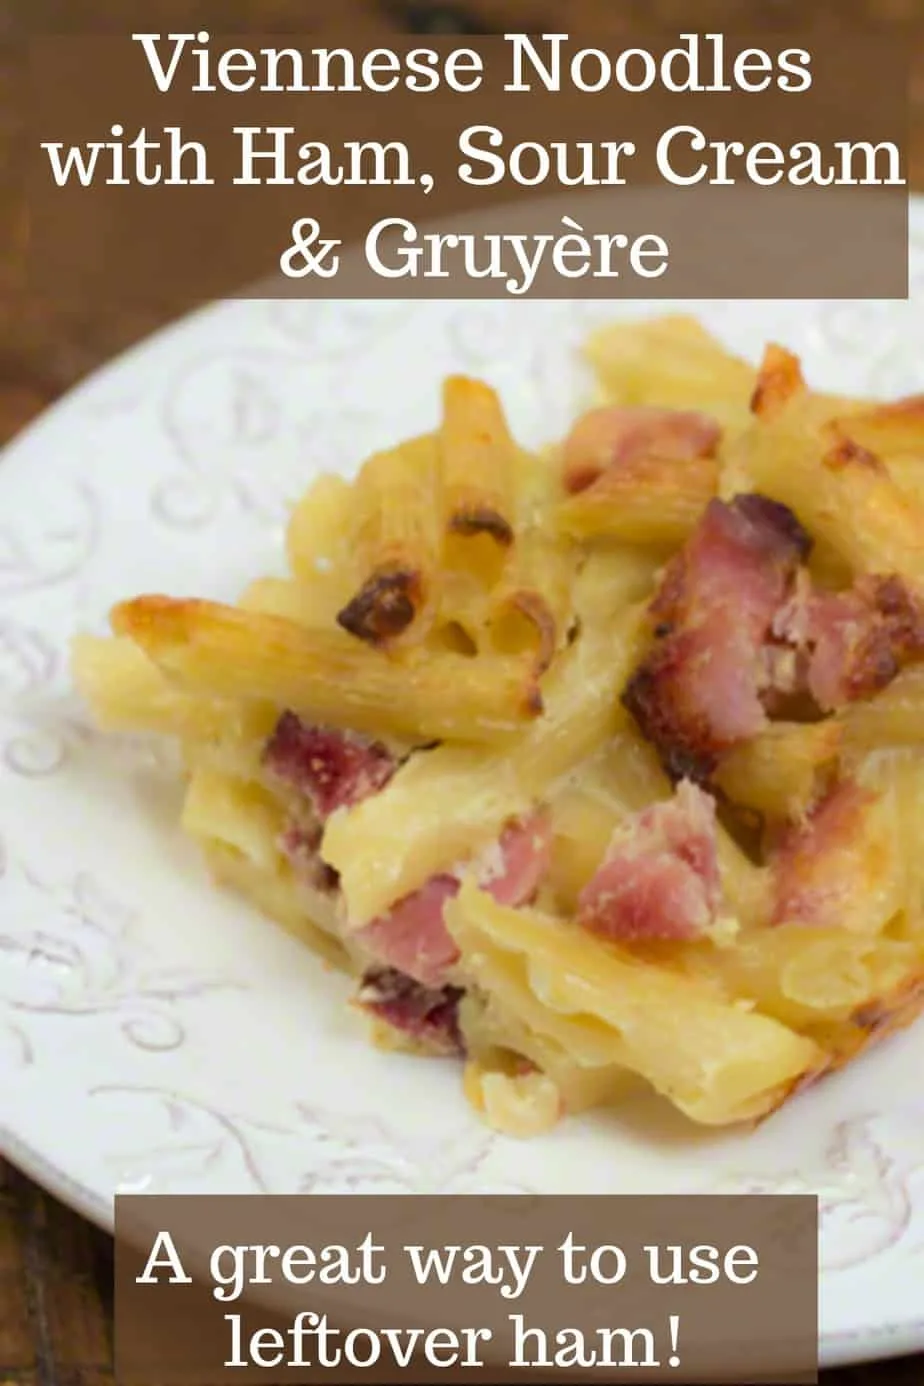 Viennese Noodles with Ham, Sour Cream, & Alpine Cheddar is an easy, delicious recipe for using up leftover ham in a frugal weeknight meal. #leftoverham #weeknightmeal #ham #pasta